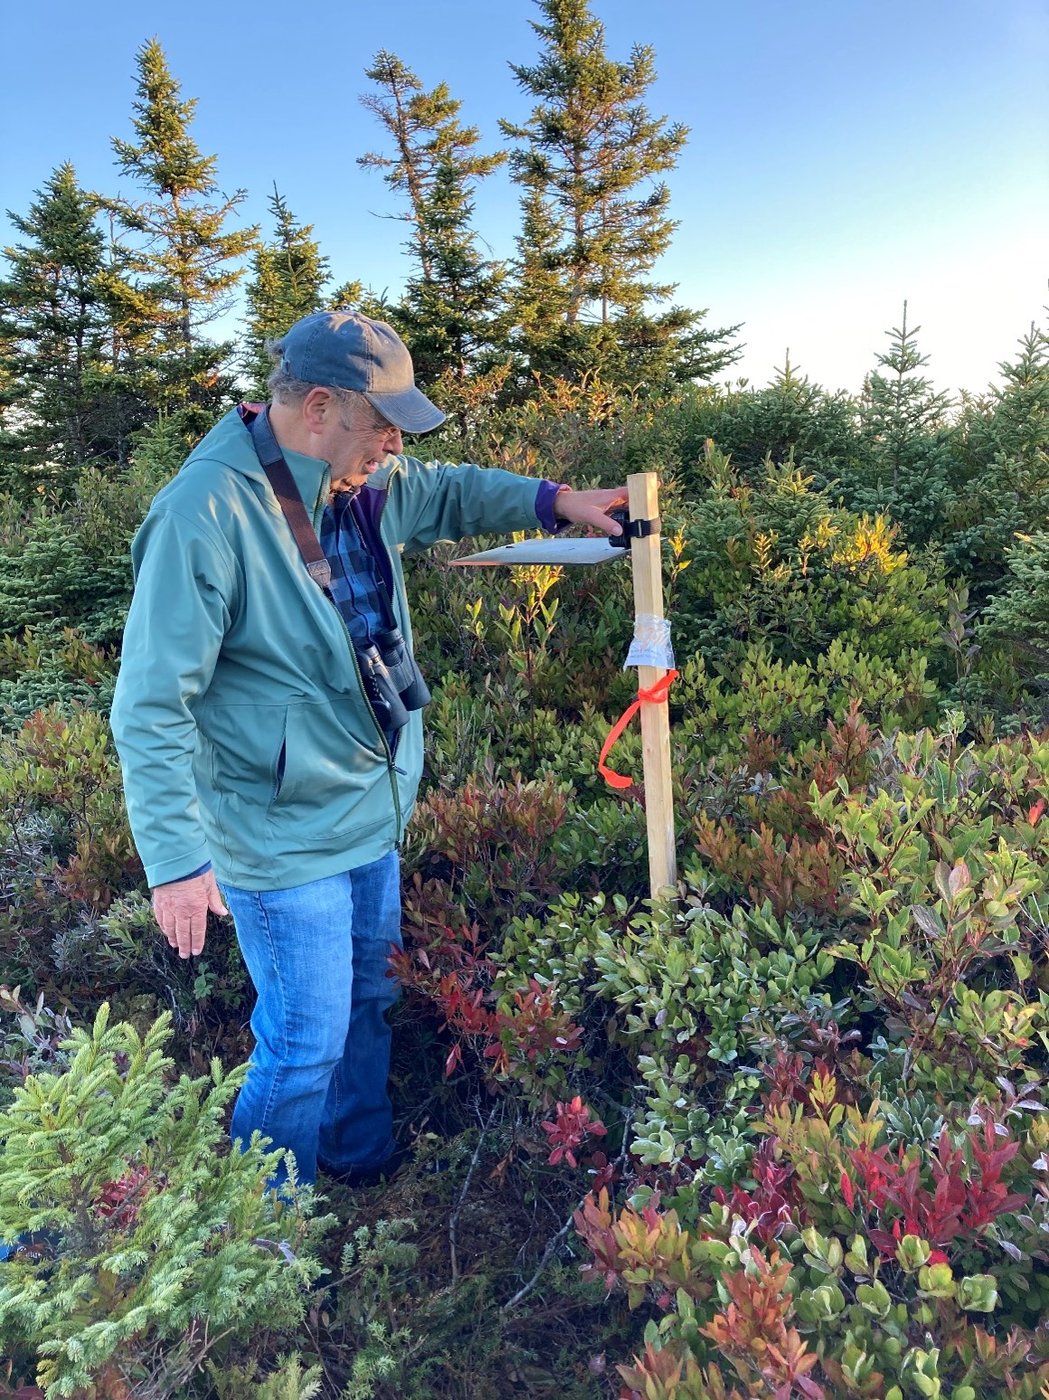 John Kearney, a former wind consultant who is now using acoustics to monitor bird populations, works on one of his stations in Nova Scotia in a handout photo. The 74-year-old environmental anthropologist is objecting to a wind development in southwestern Nova Scotia, saying it poses too great a risk to migrating flocks. The proponent of Wedgeport Wind Farm disagrees, saying the blades don’t threaten declining populations, and help the province reach its greenhouse gas emission goals. THE CANADIAN PRESS/HO-Danielle Horne